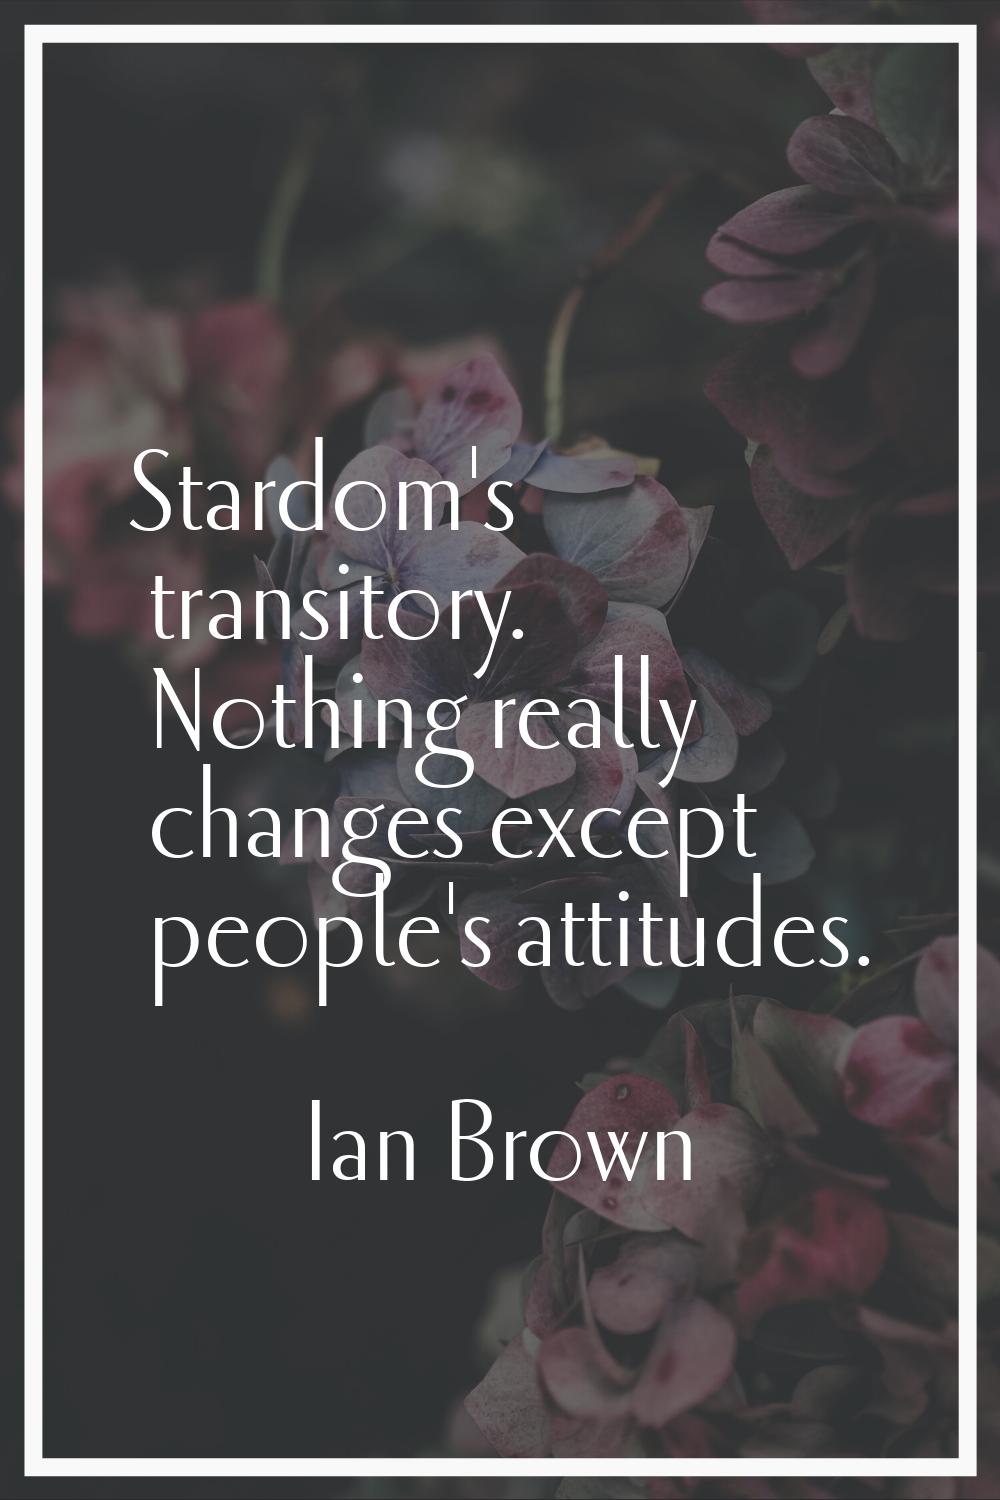 Stardom's transitory. Nothing really changes except people's attitudes.